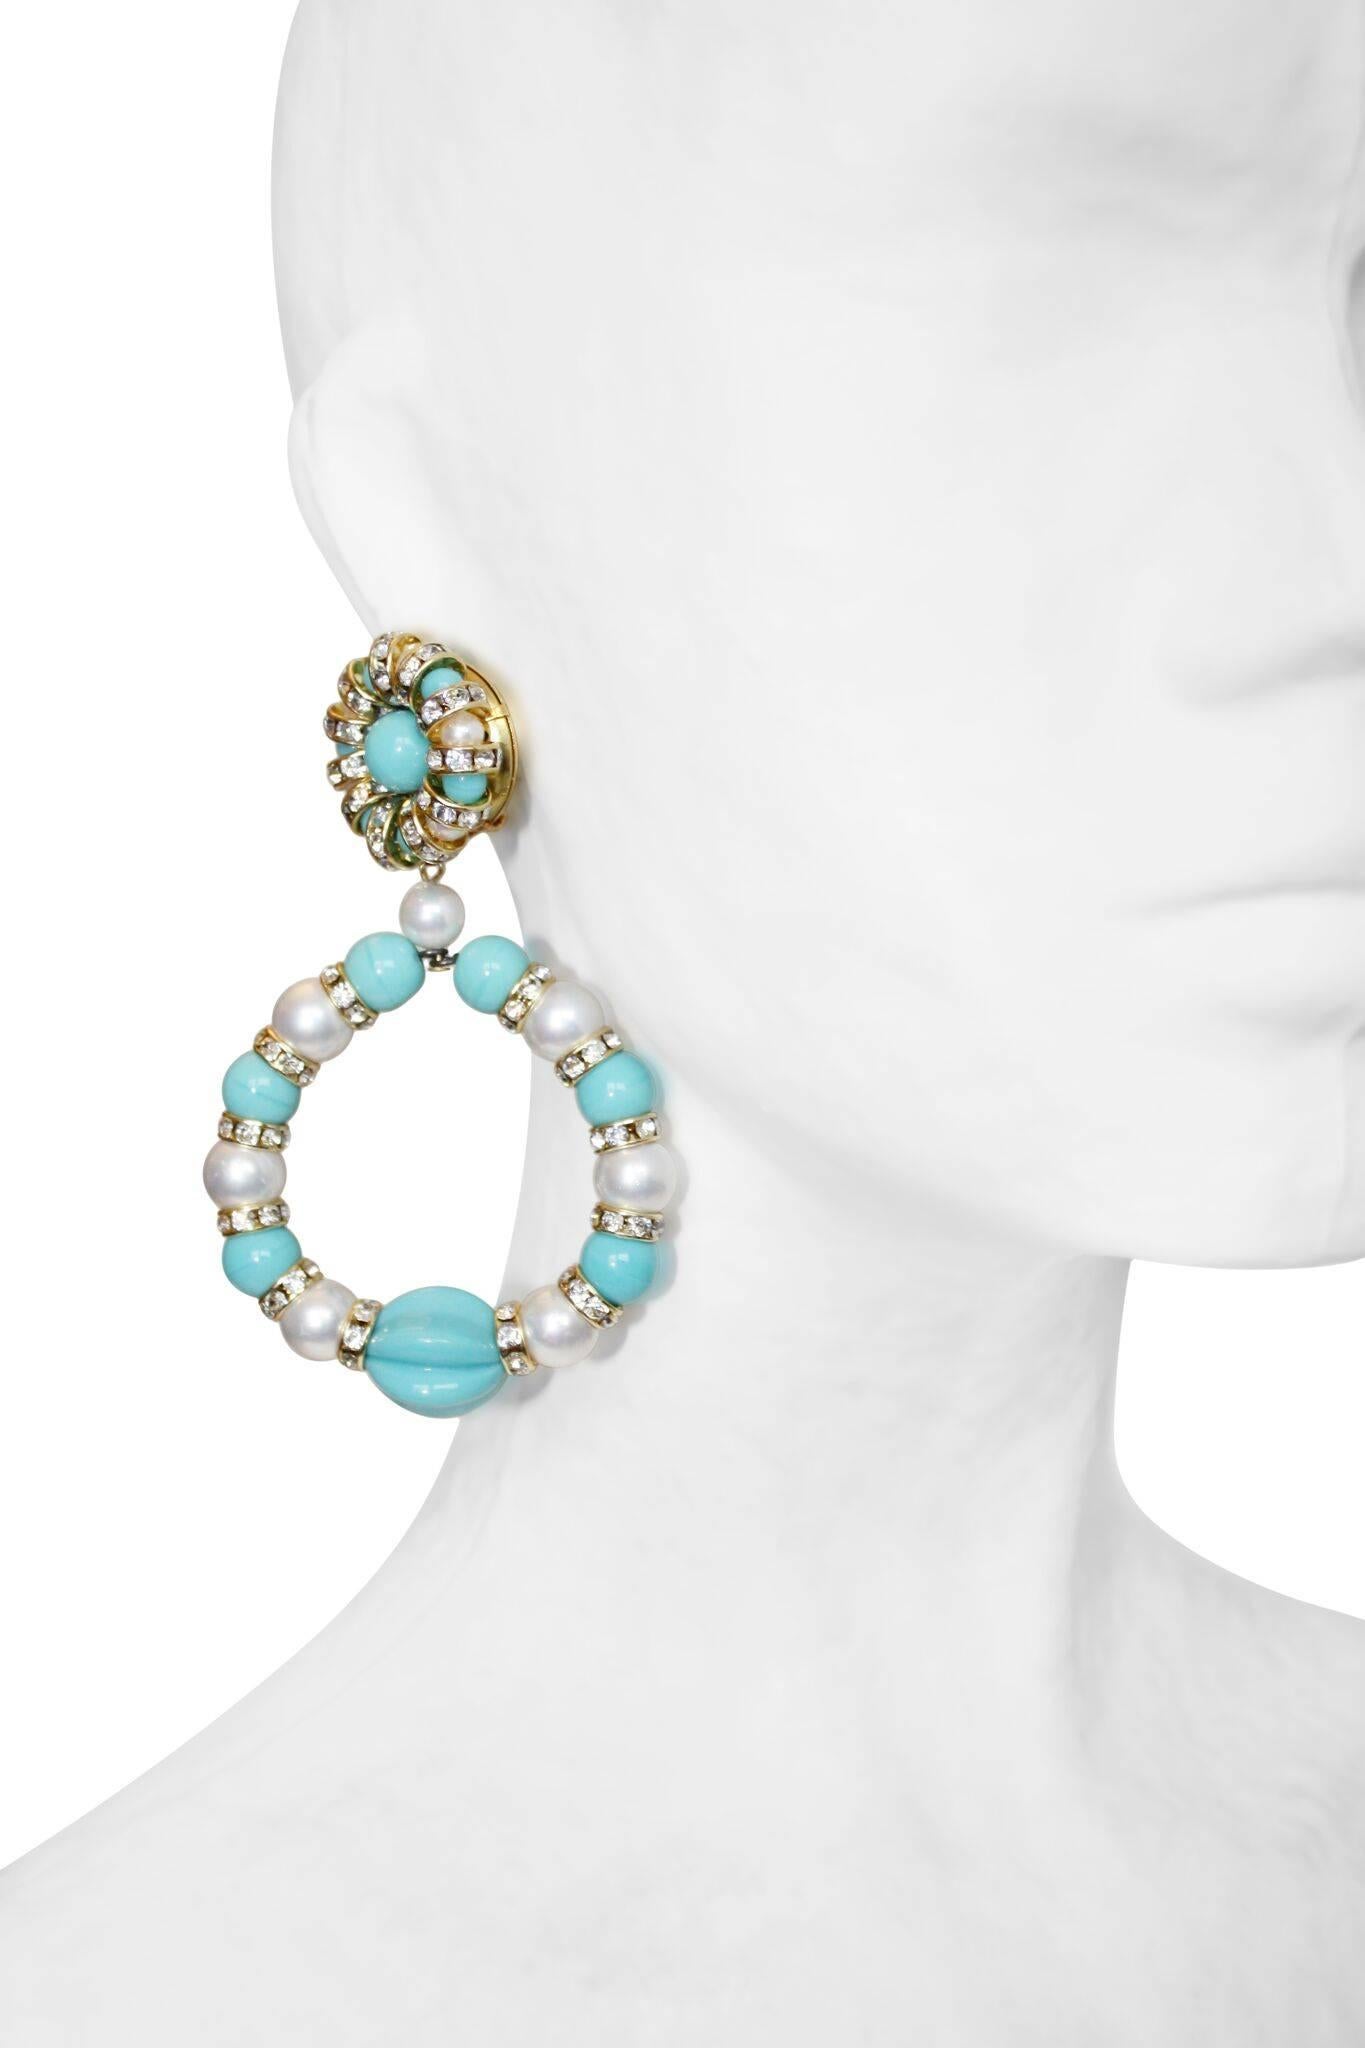 Glass pearl, faux turquoise, and Swarovski crystal rondelle statement clip earrings from Francoise Montague. 

Designer Biography:

La maison Françoise Montague has been recognized and respected in the world of haute couture costume jewelry